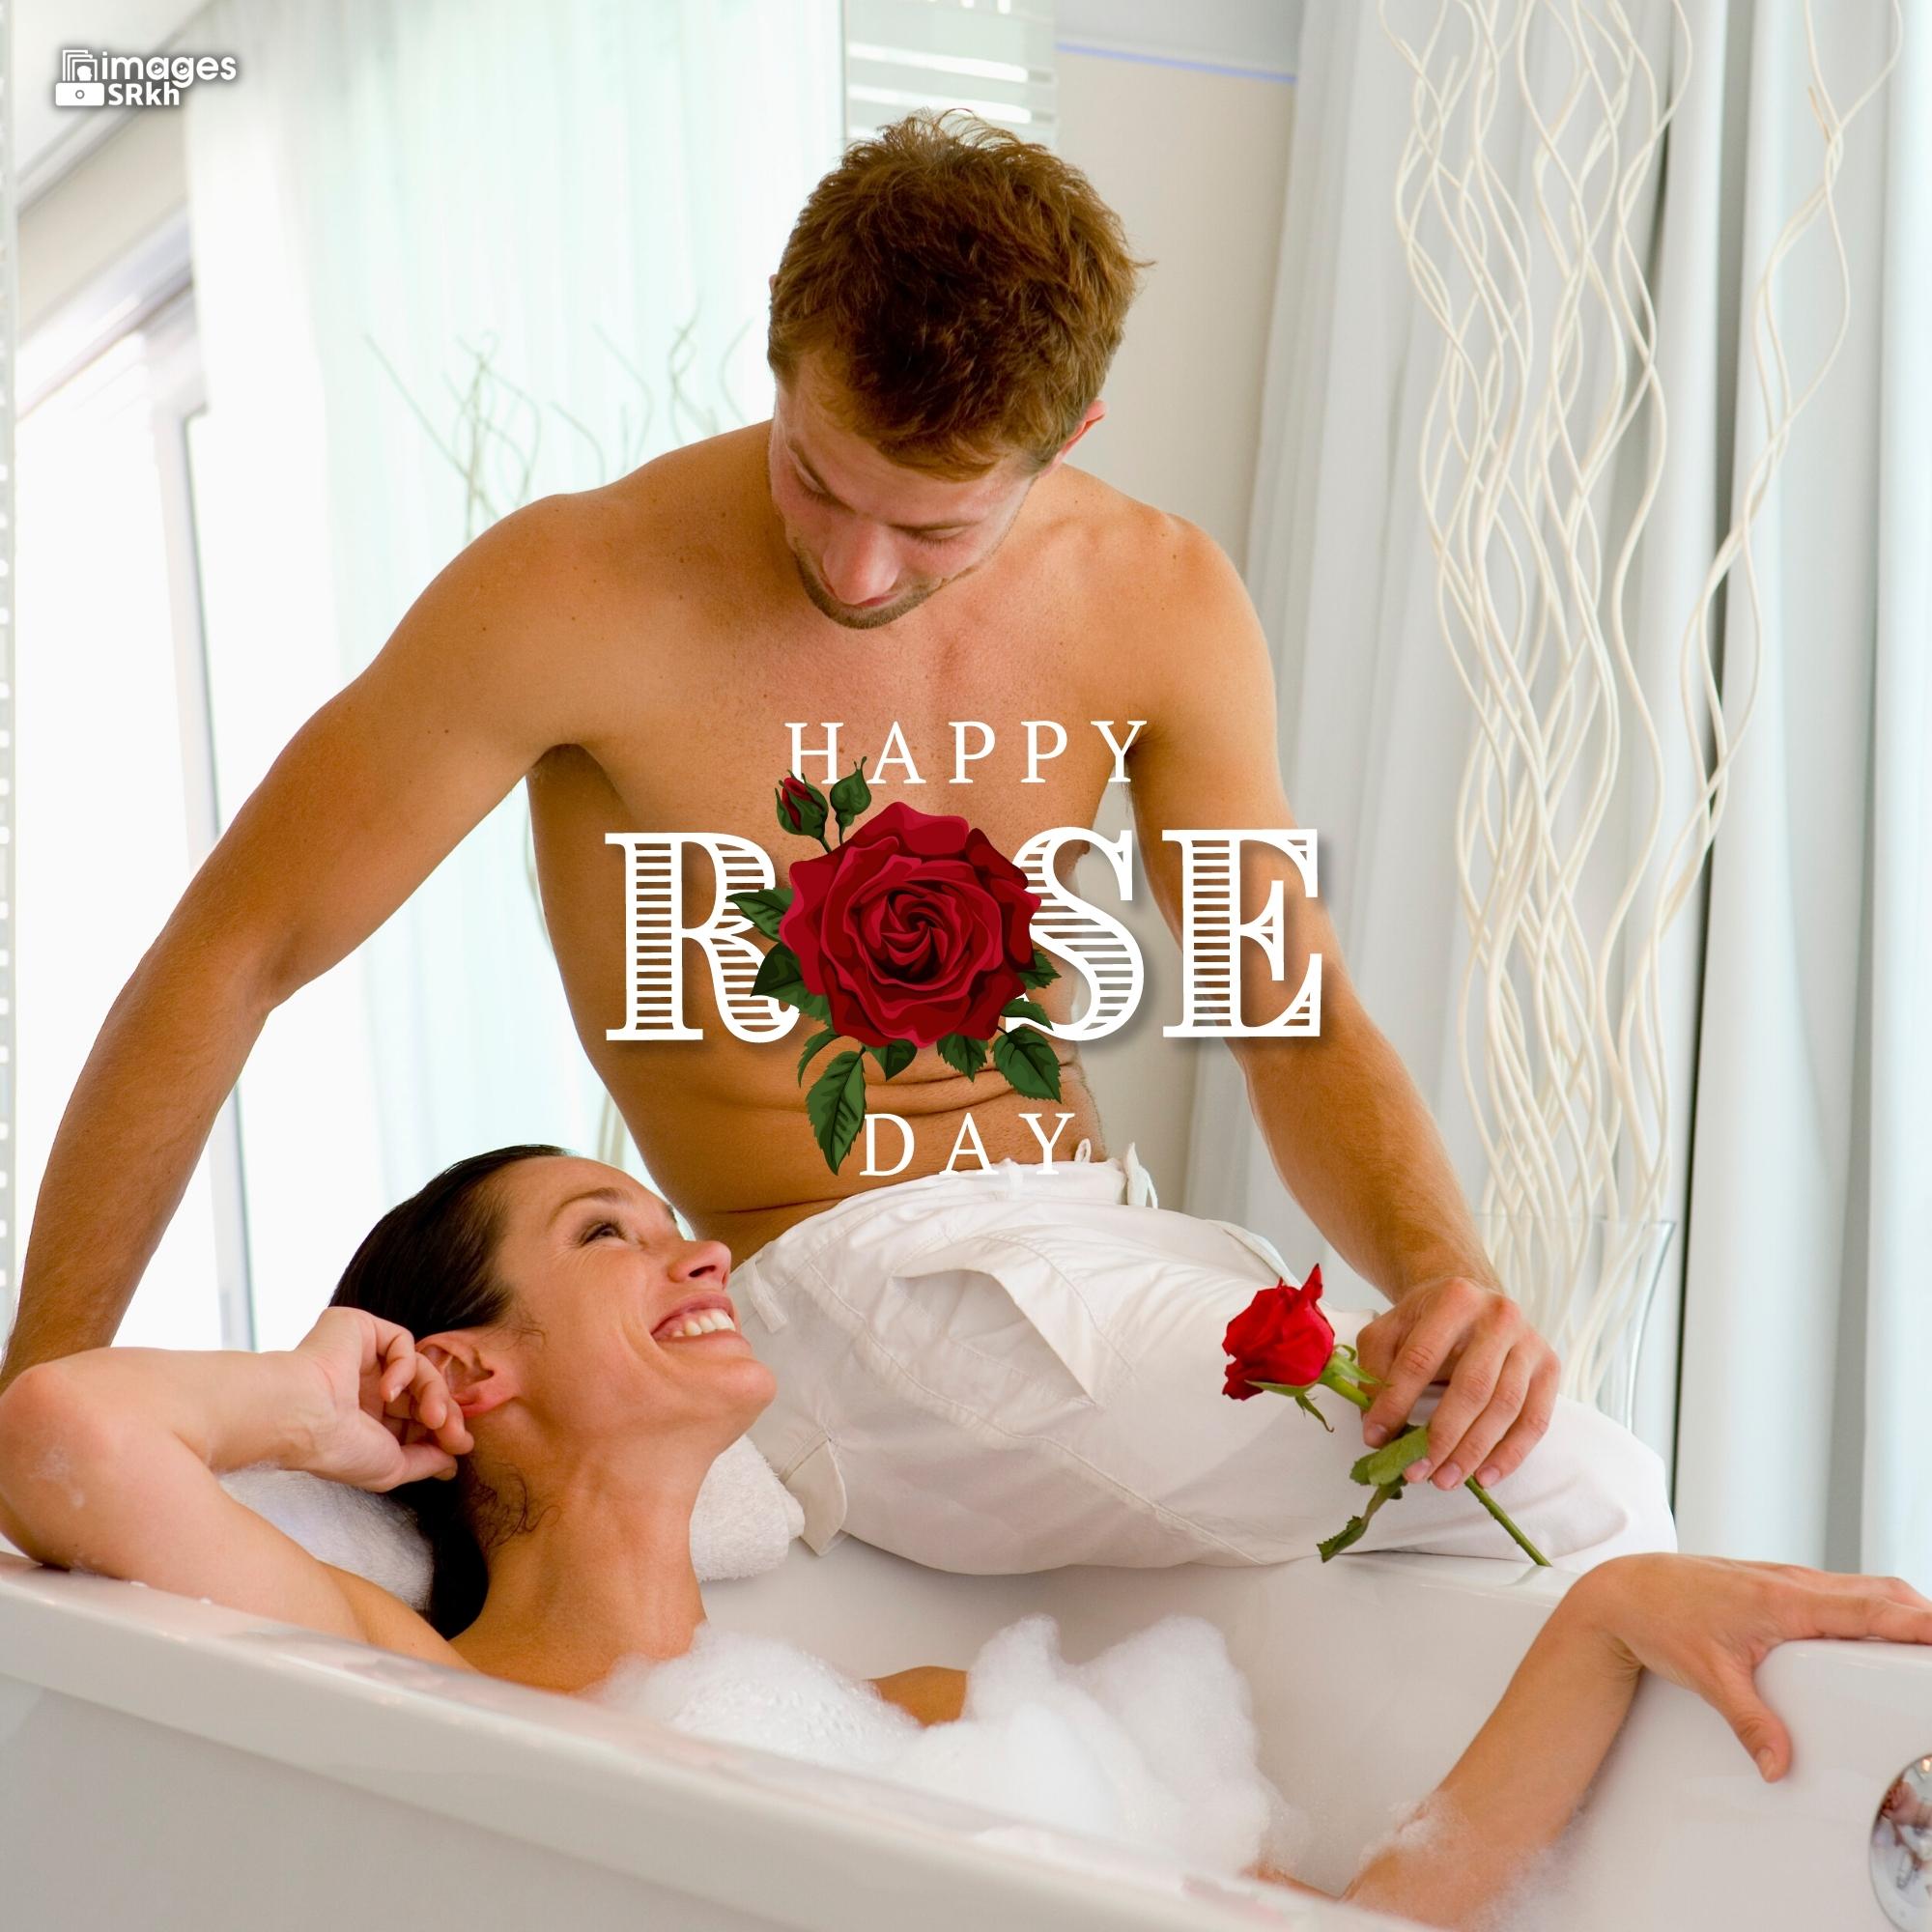 Romantic Rose Day Images Hd Download (43)